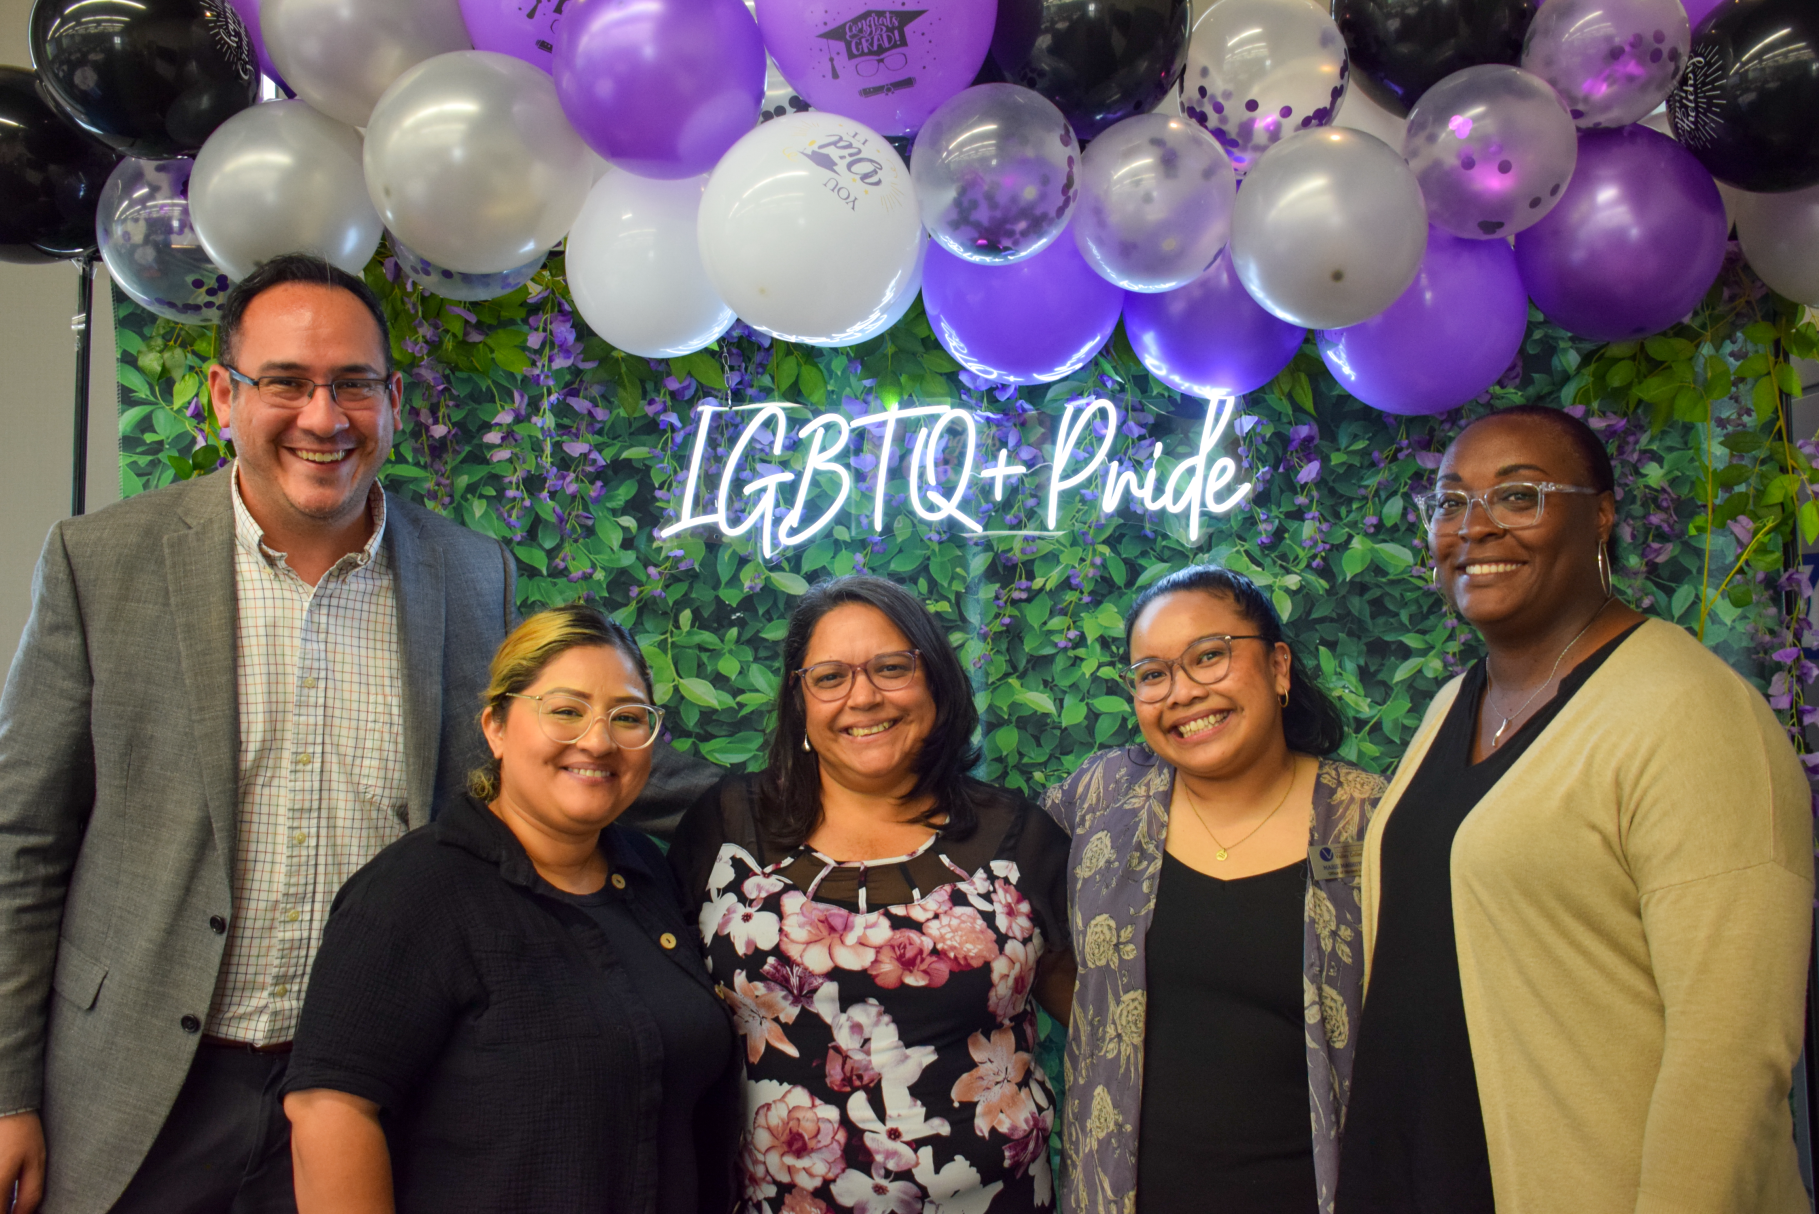 A group photo of faculty in front of some balloons and a LGBTQ+ Pride neon sign